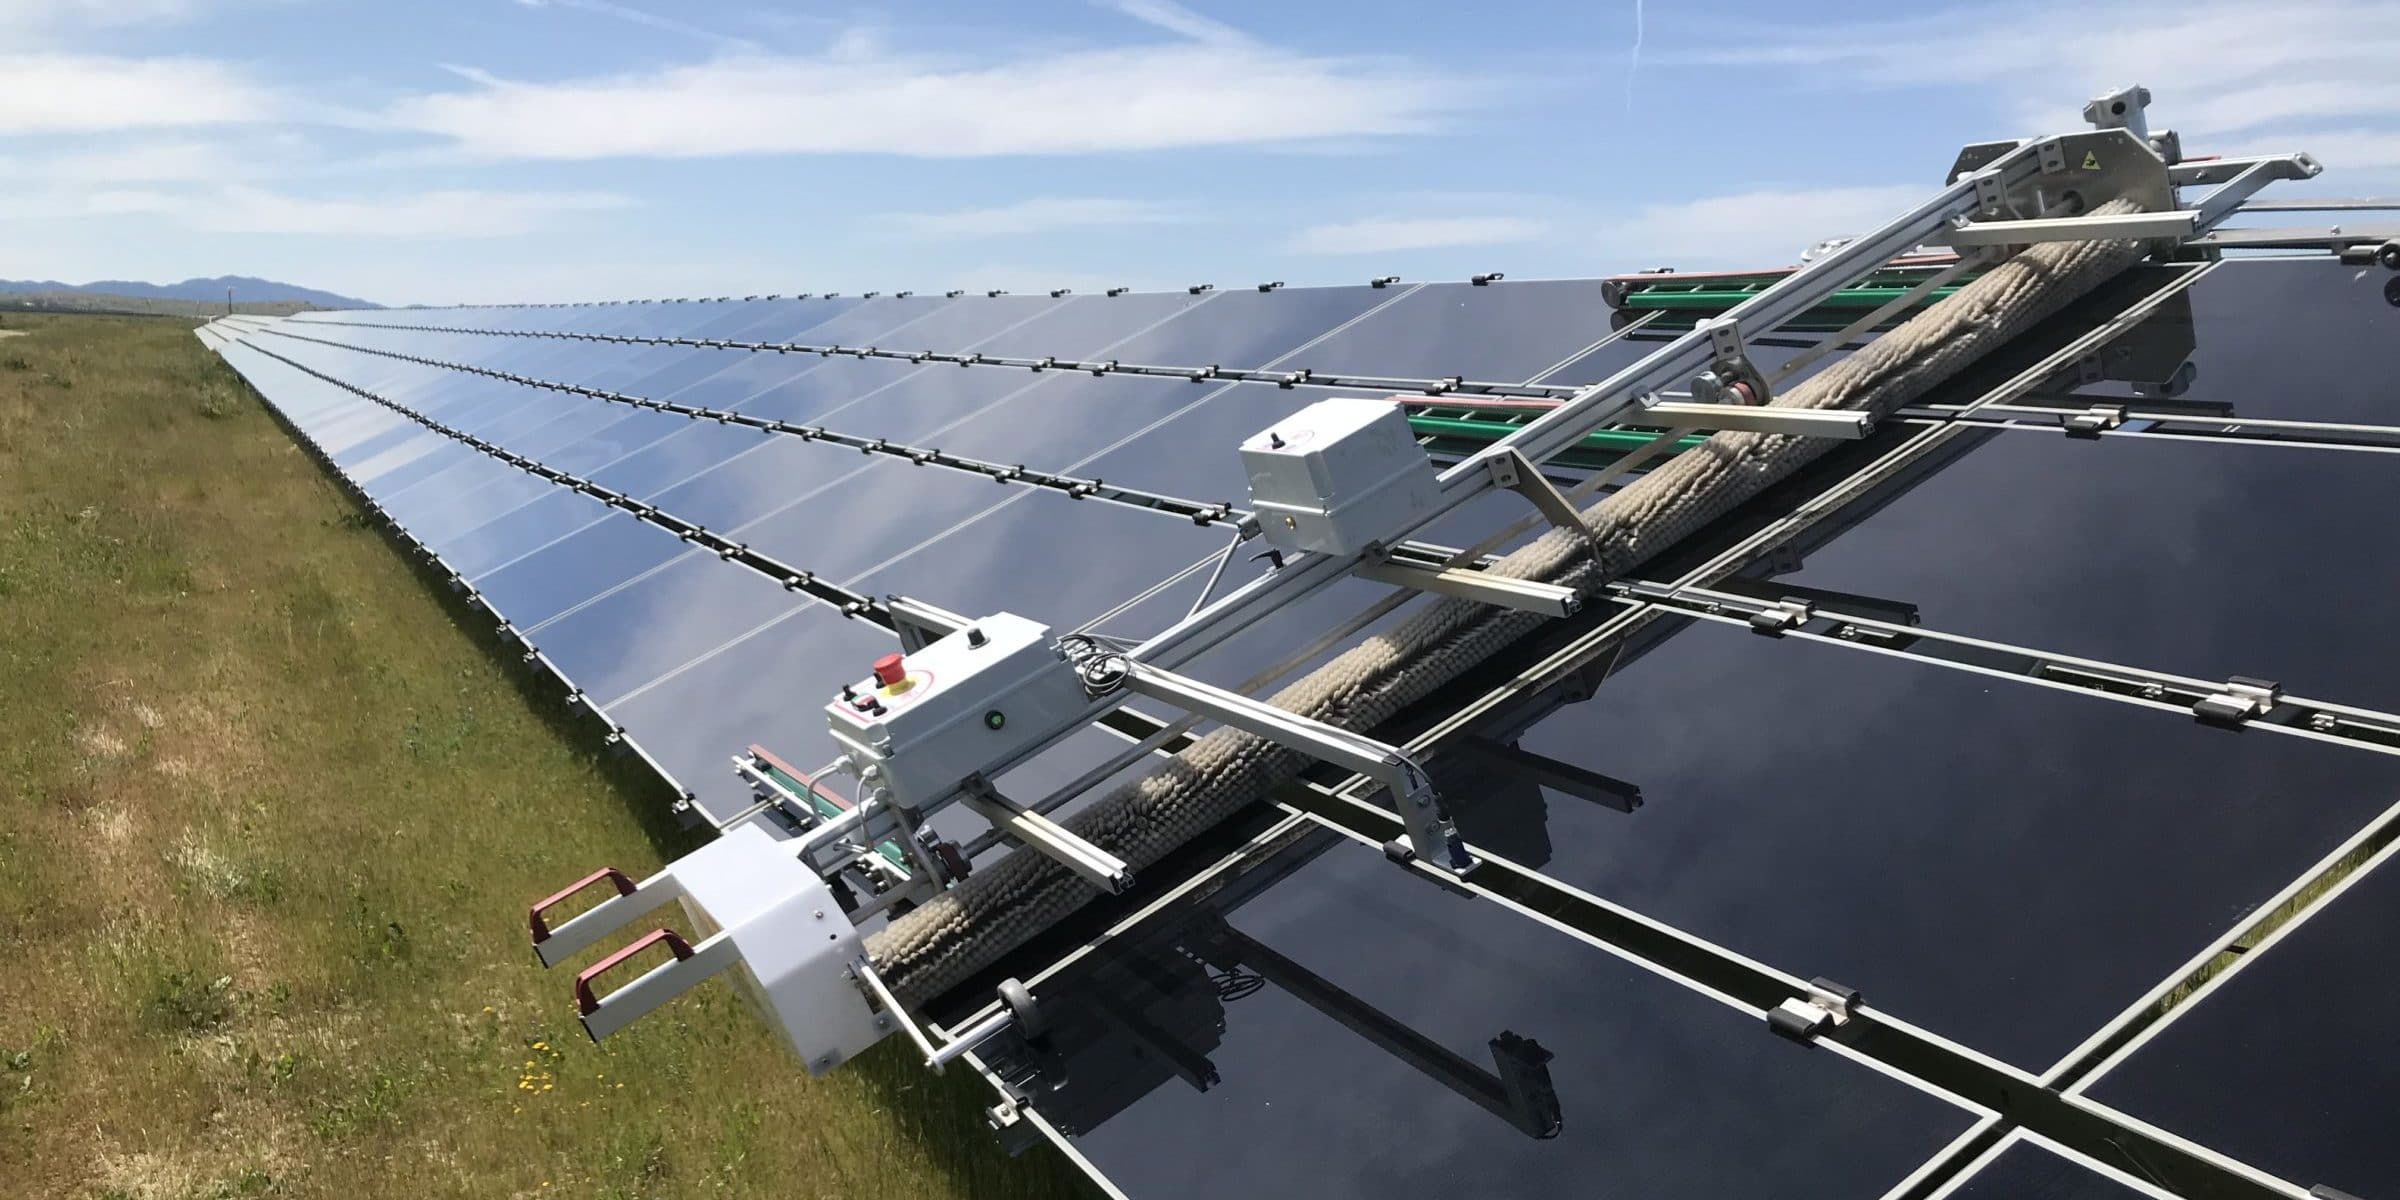 Solar Panel Cleaning Services in Lakeway TX